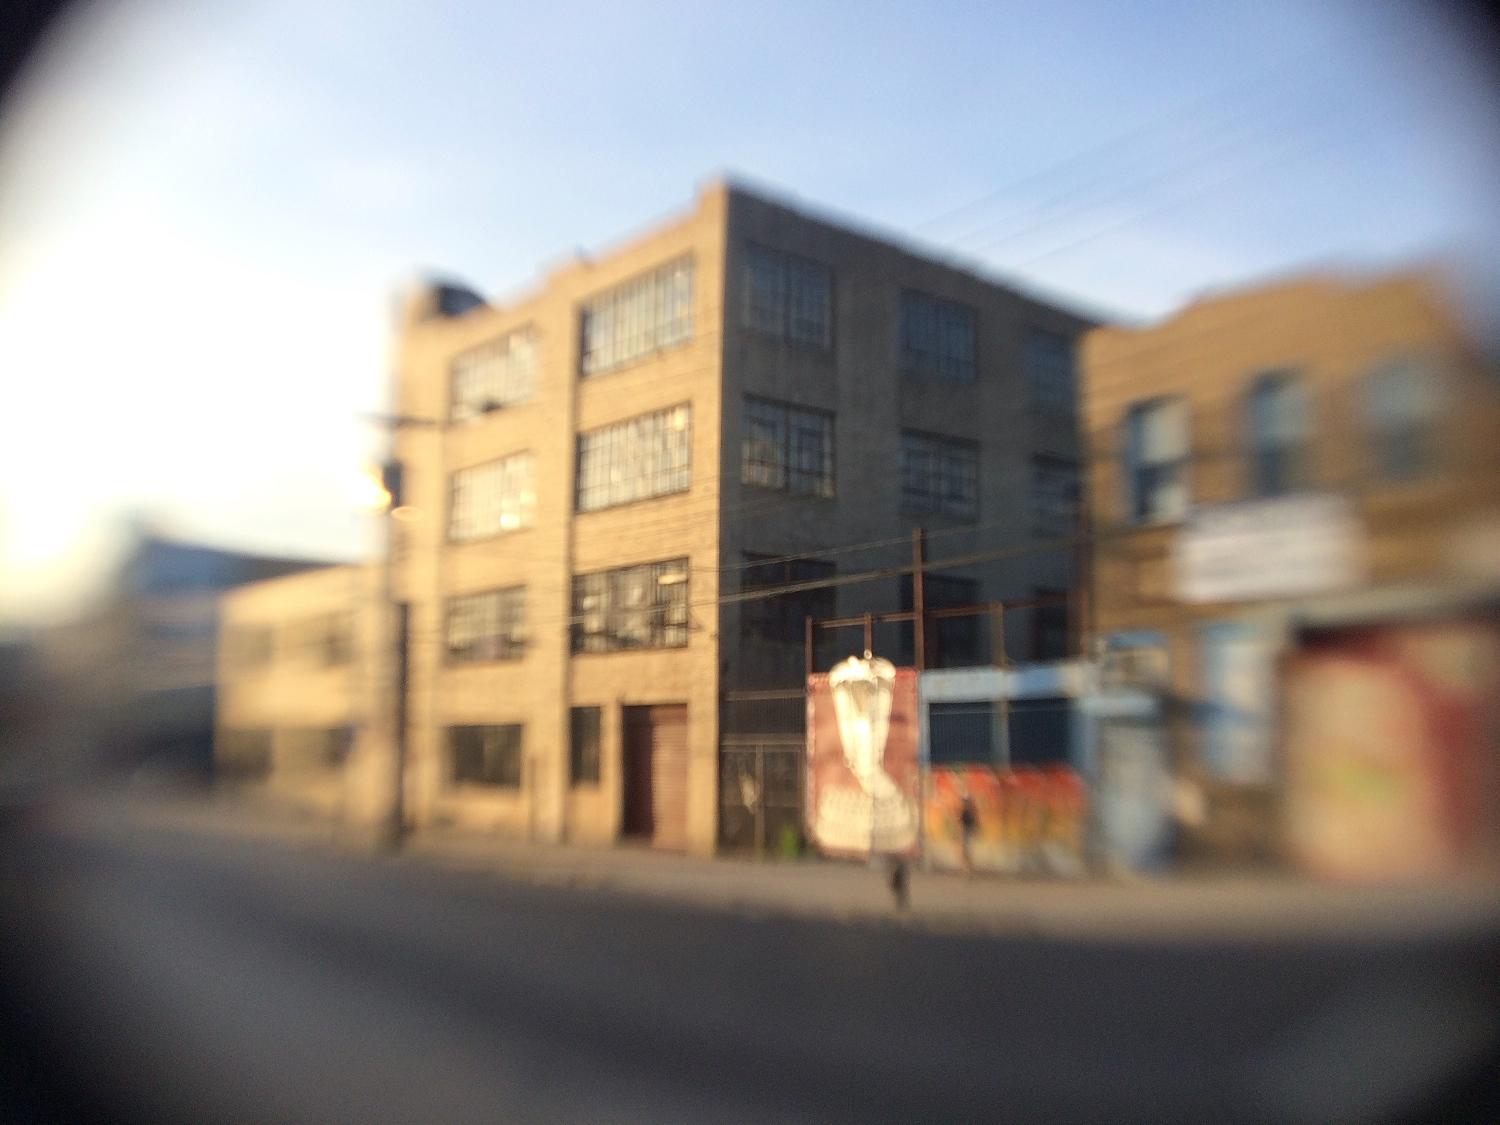 blurs arent defects but the charm in lensbabys new mobile lens kit lensbaby creative sample 11